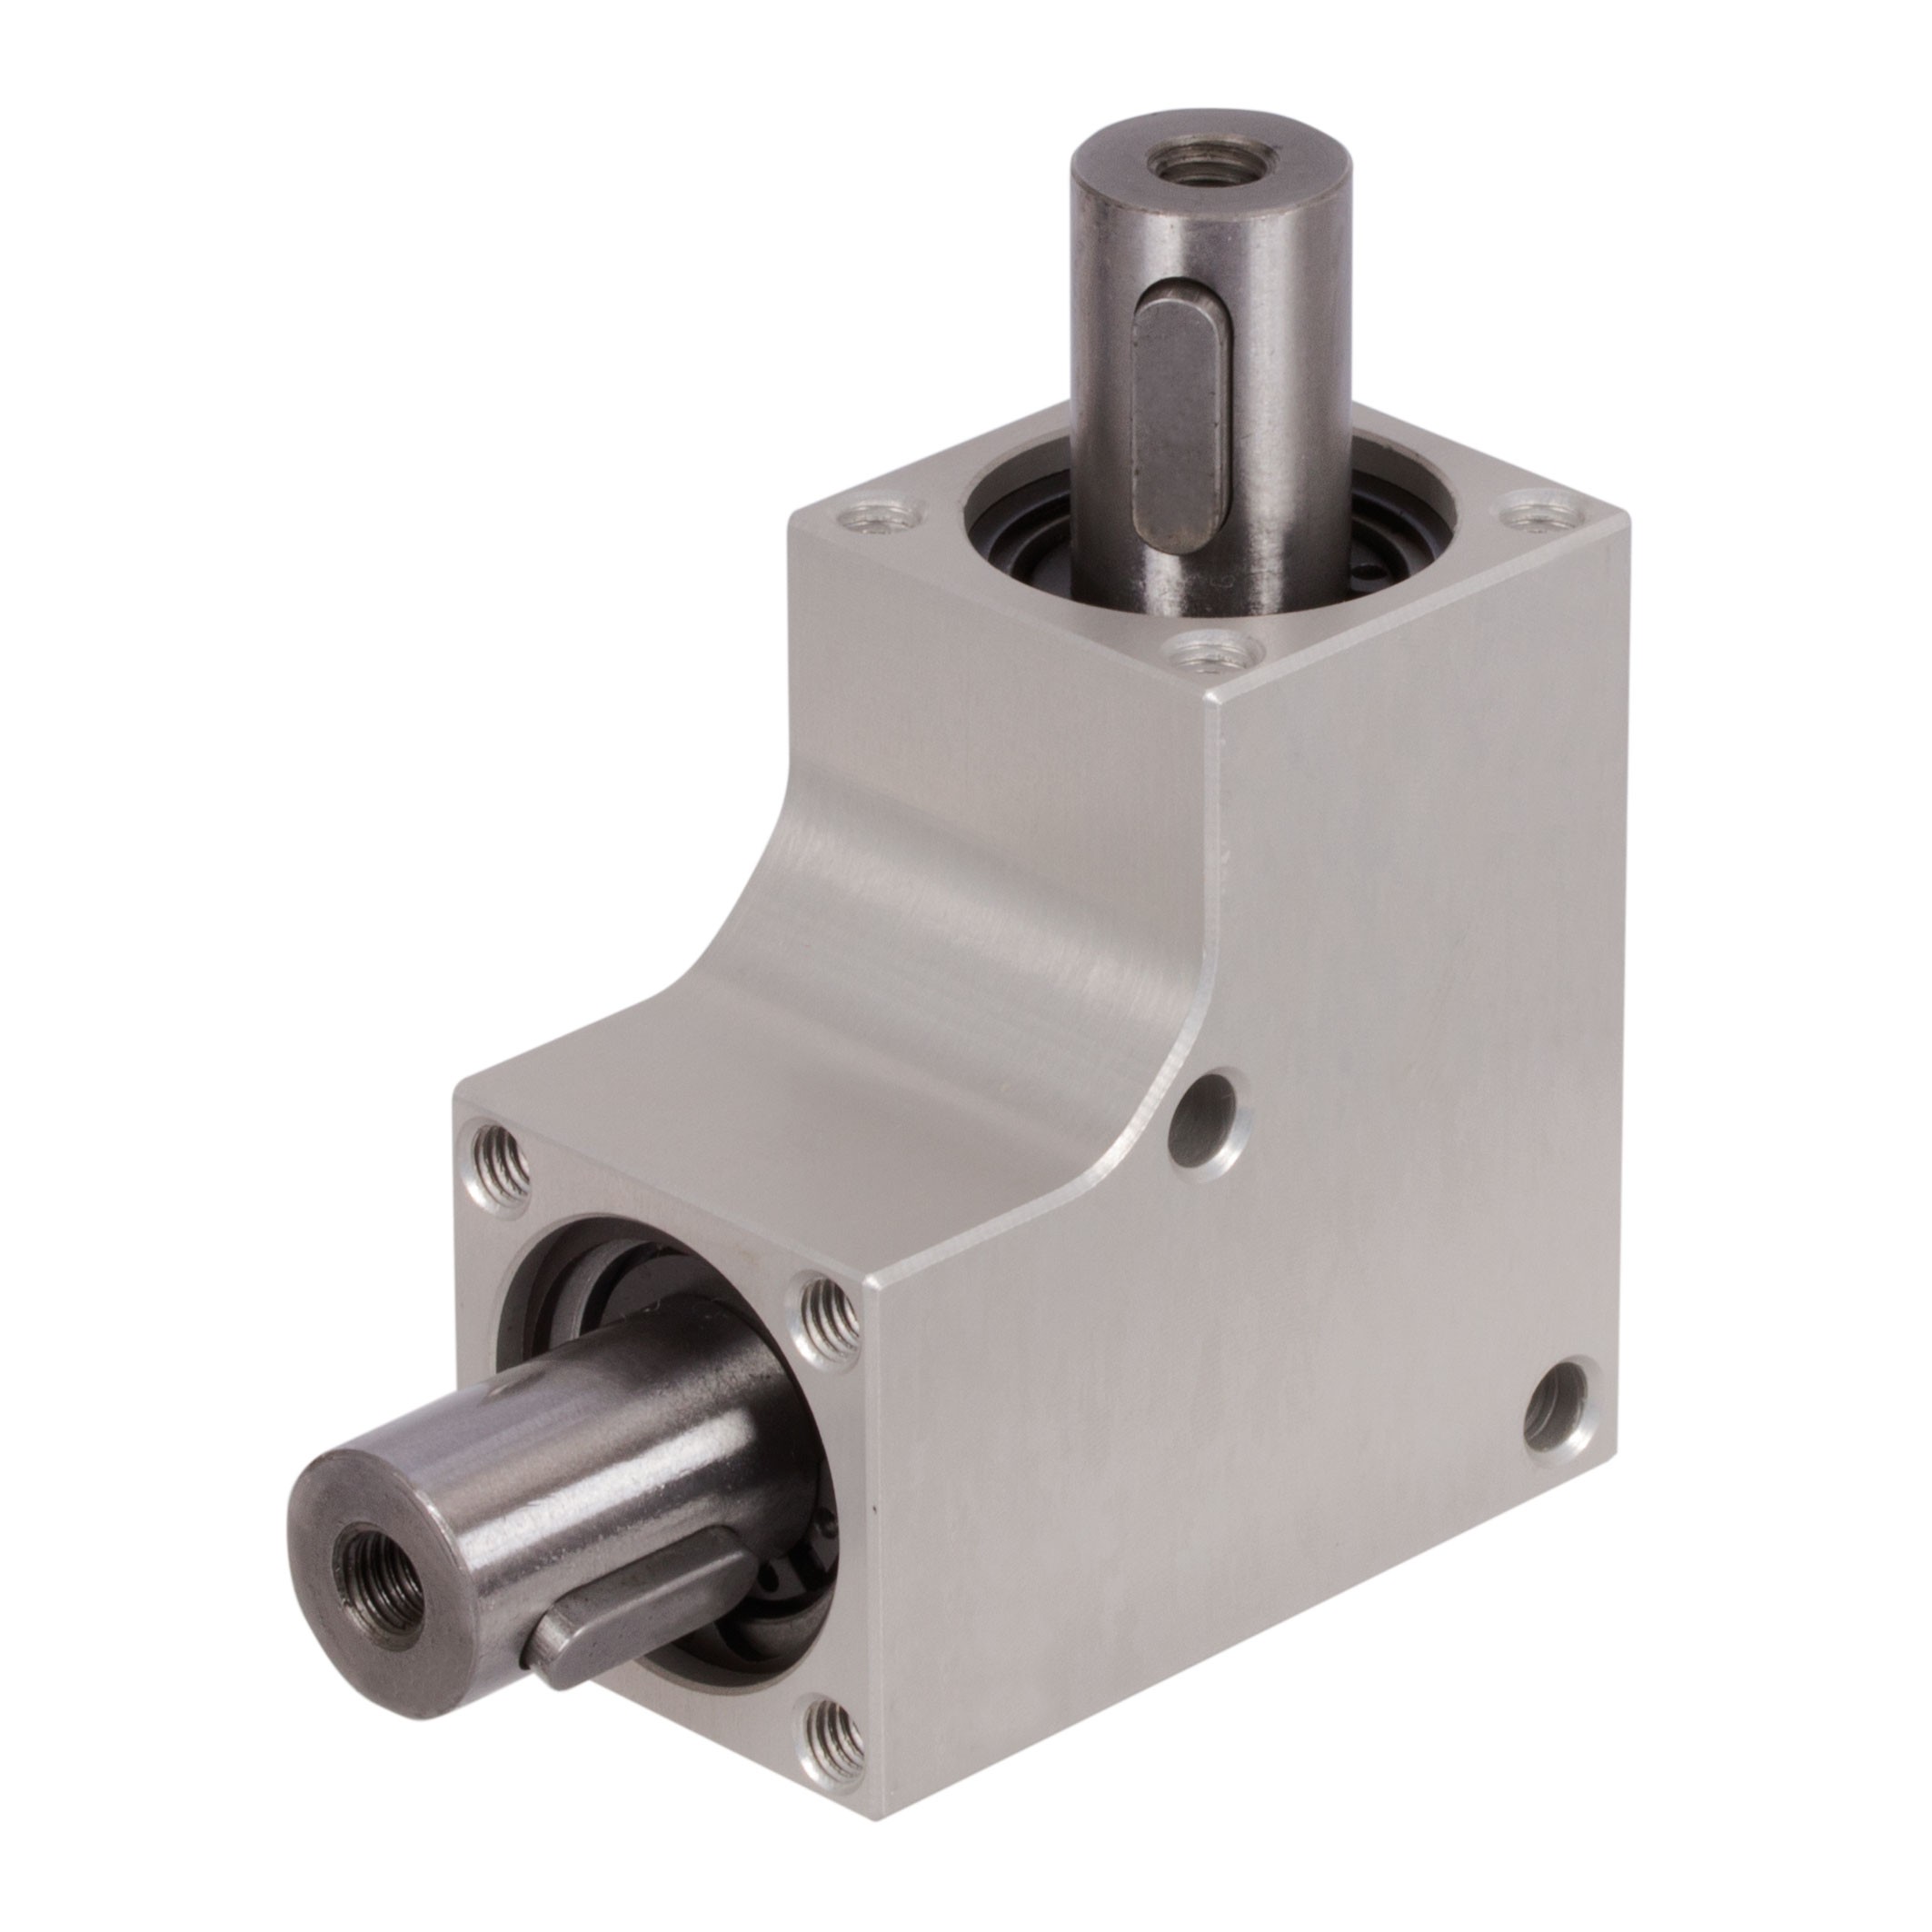 1:1 Ratio x 70mm Spiral Bevel Gearbox - BSH Type with 6mm Shaft Diameter,  Type L 